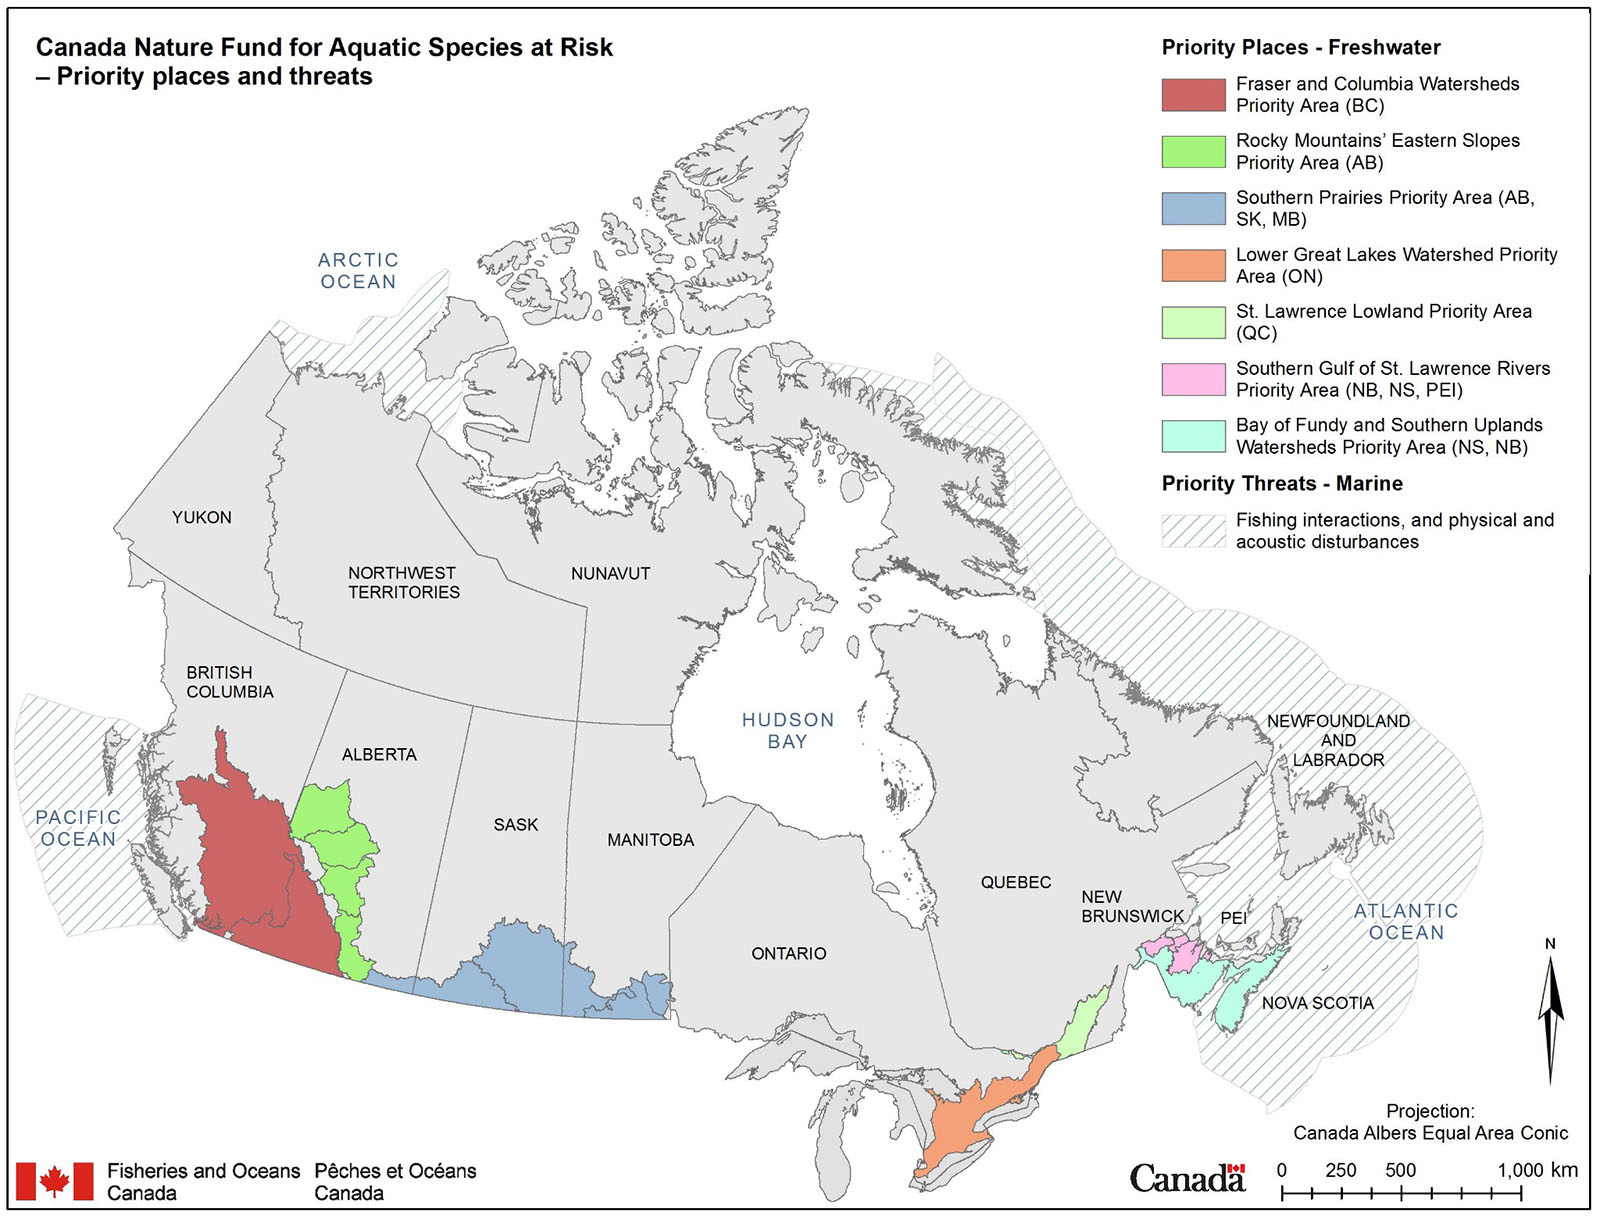 Canada Nature Fund for Aquatic Species at Risk - Priority places and threats